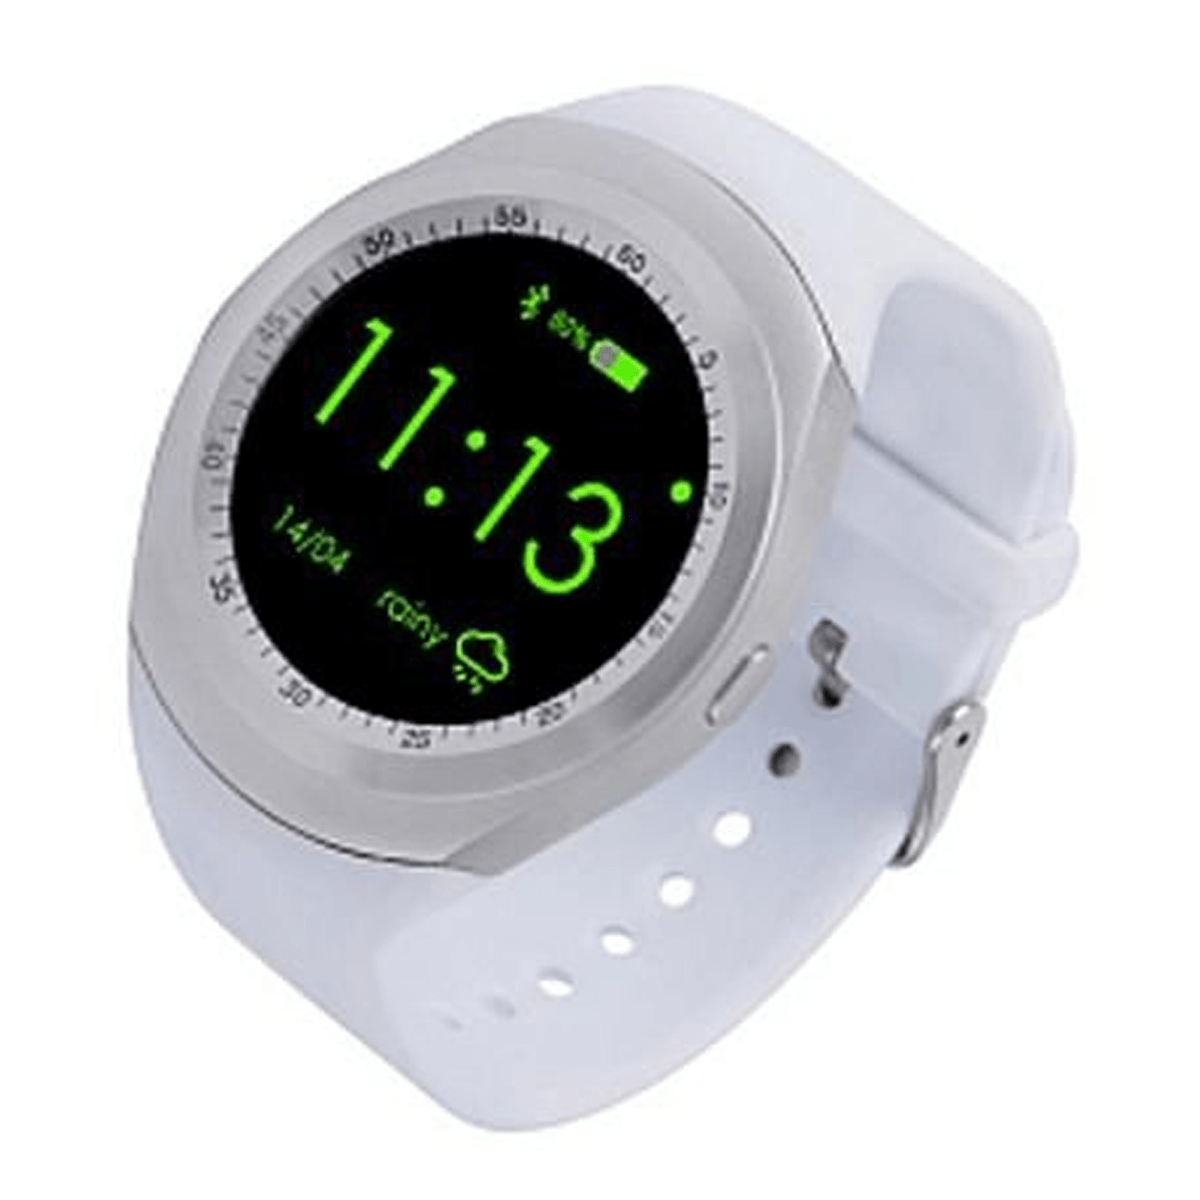 G-Tab W-307 Smartwatch 1.54'' IPS Display 32MB ROM 32MB RAM Sim Supported Android Watch White